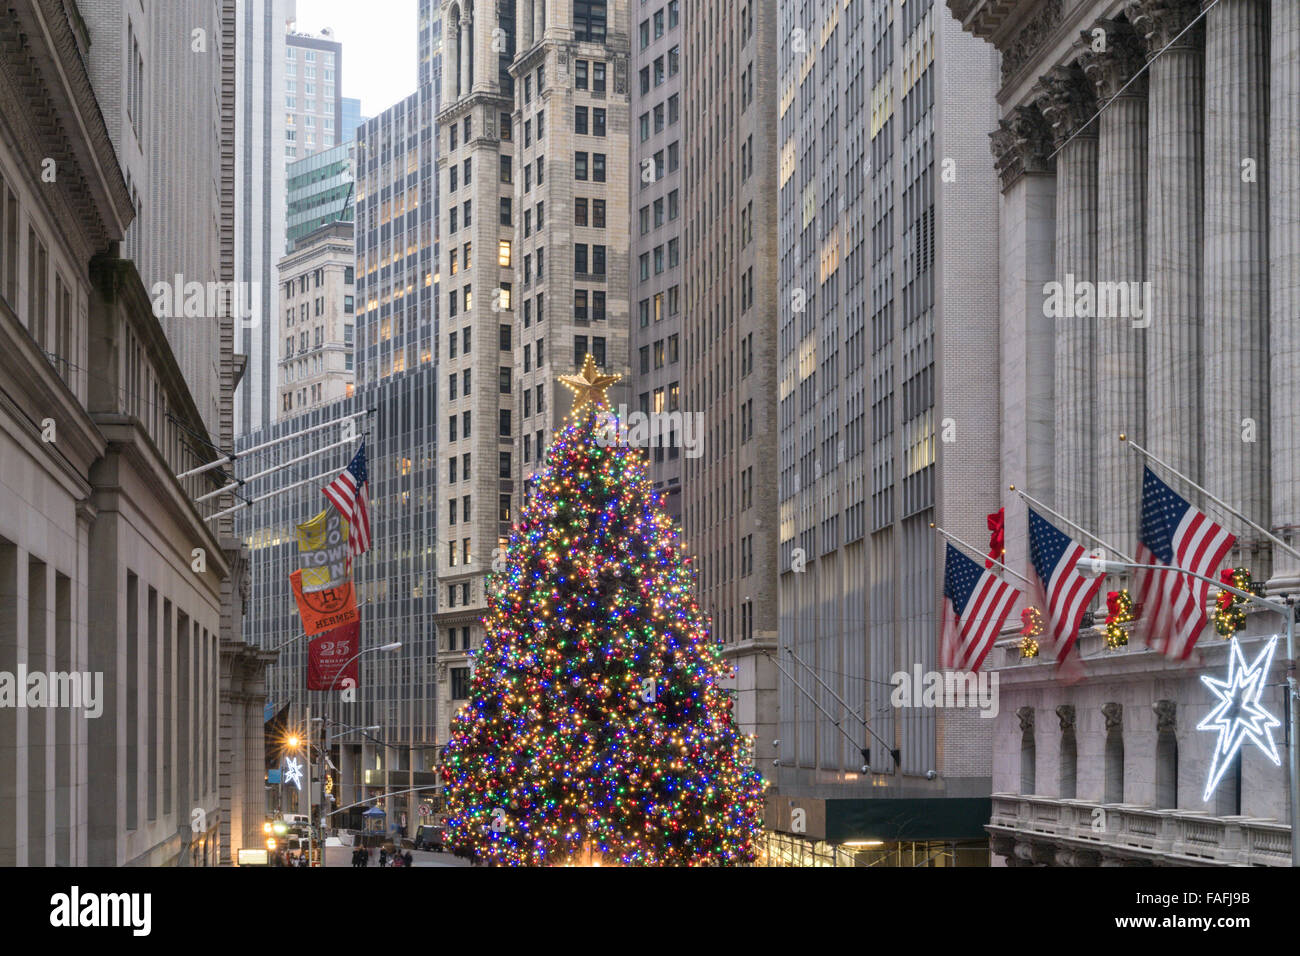 NYSE Christmas Tree in Financial District, NYC Stock Photo - Alamy